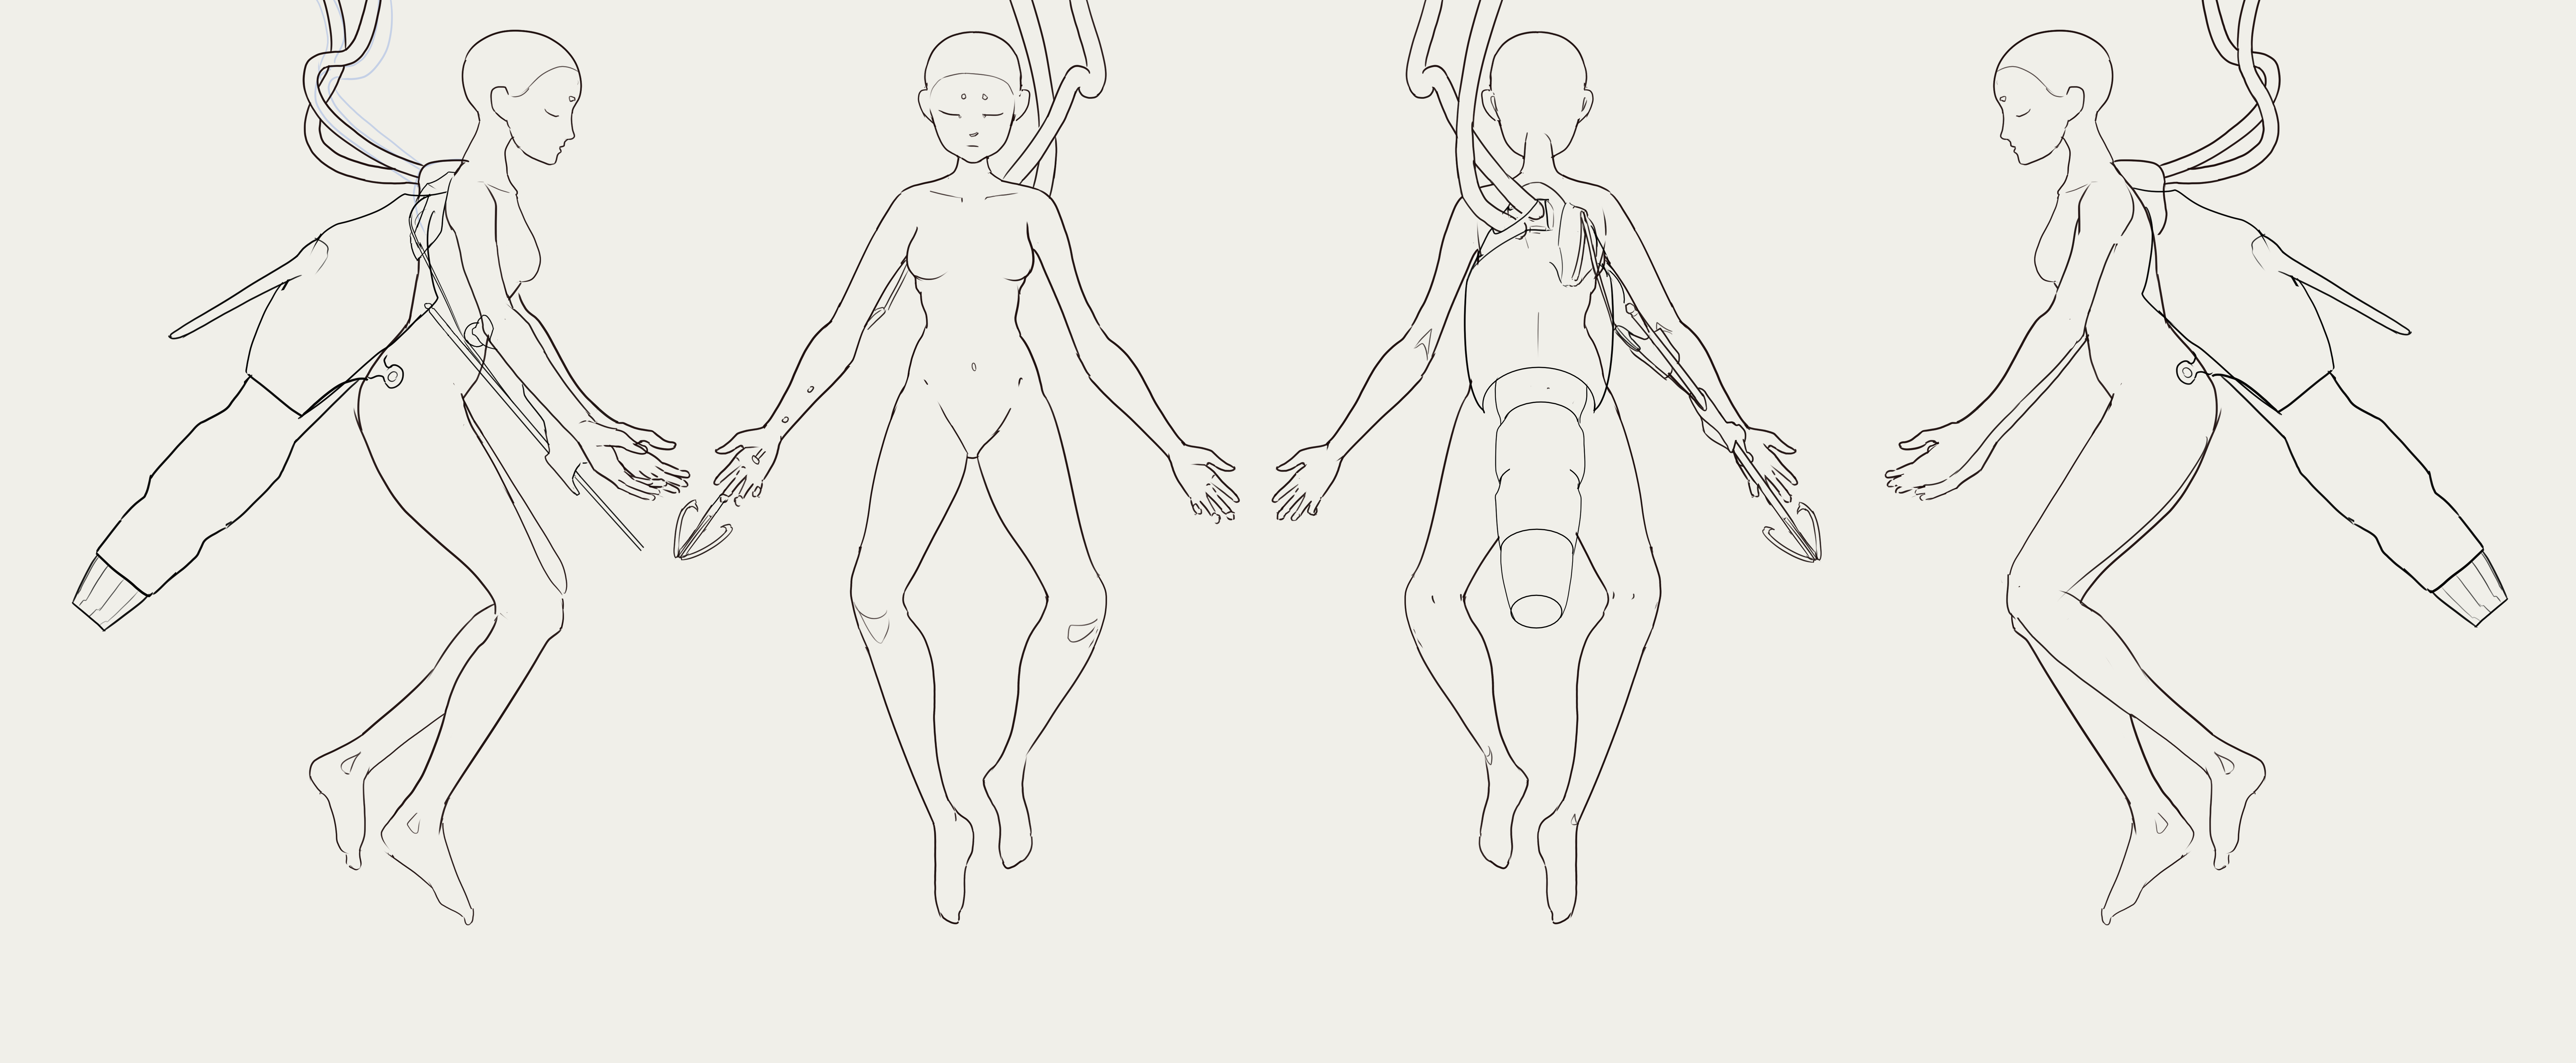 Four sketches of the doll. The right and left ones have an insectoid mechanical thruster attached to the doll's mid back.